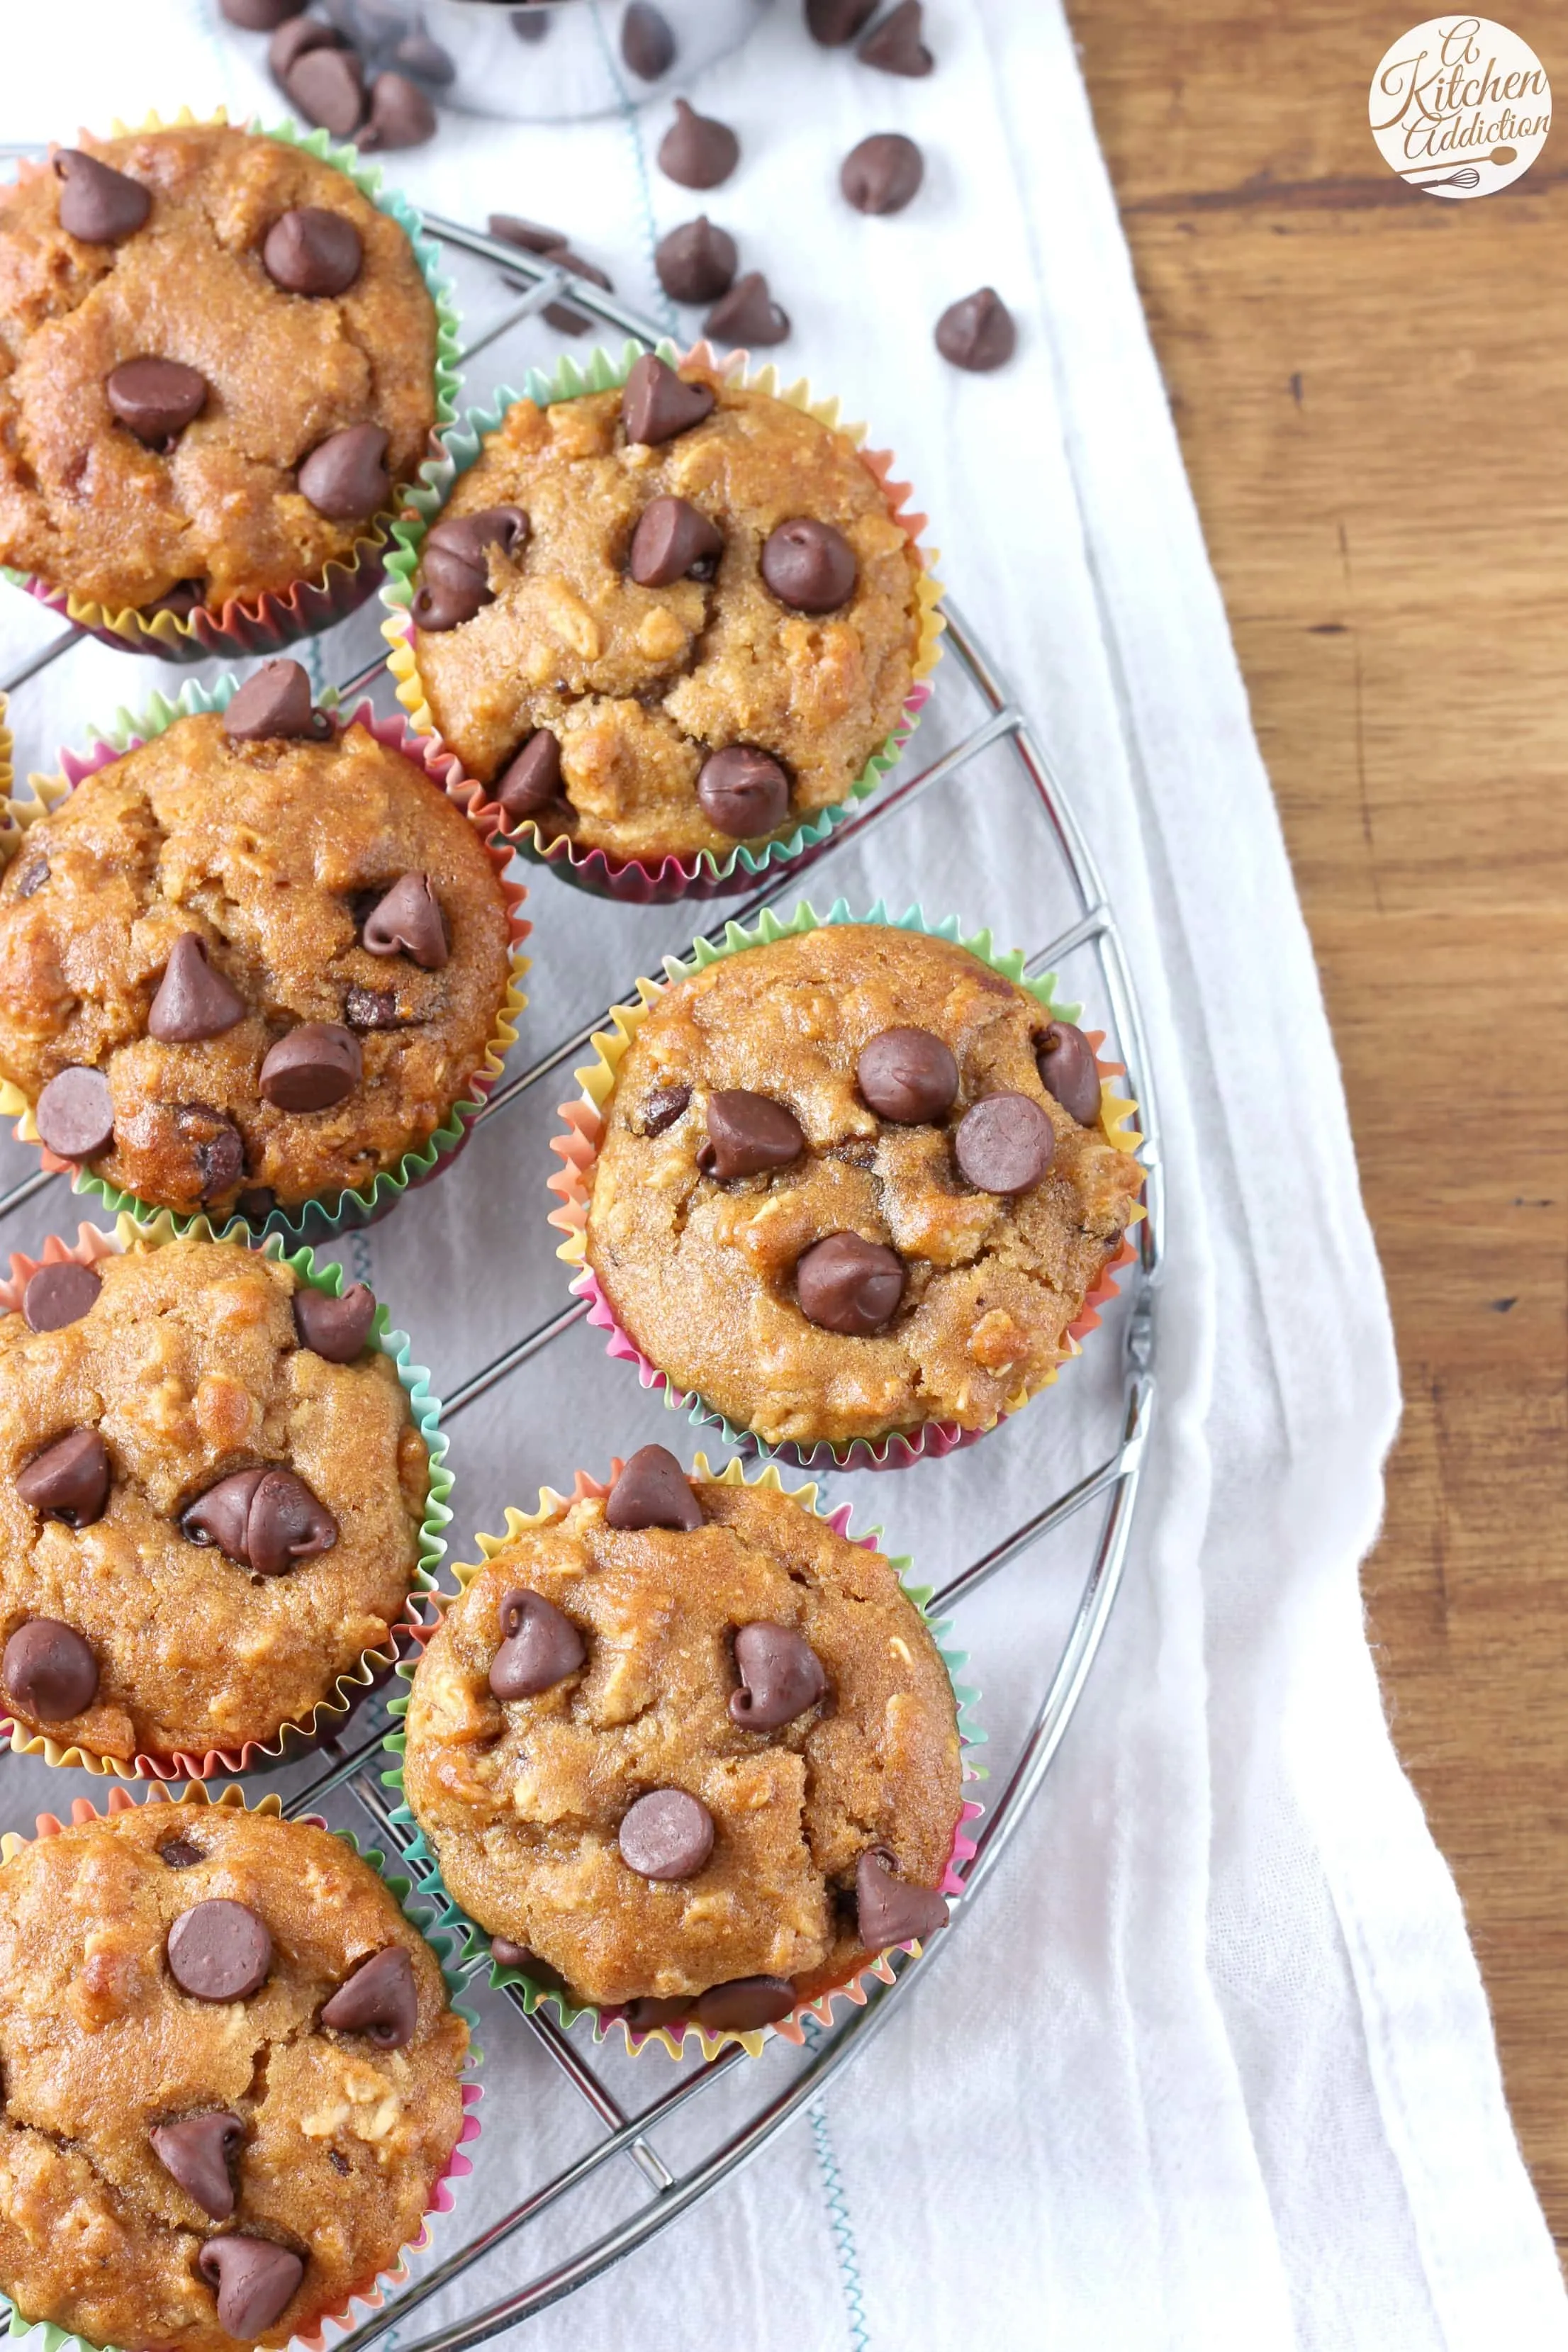 Peanut Butter Chocolate Chip Oat Muffins Recipe from A Kitchen Addiction